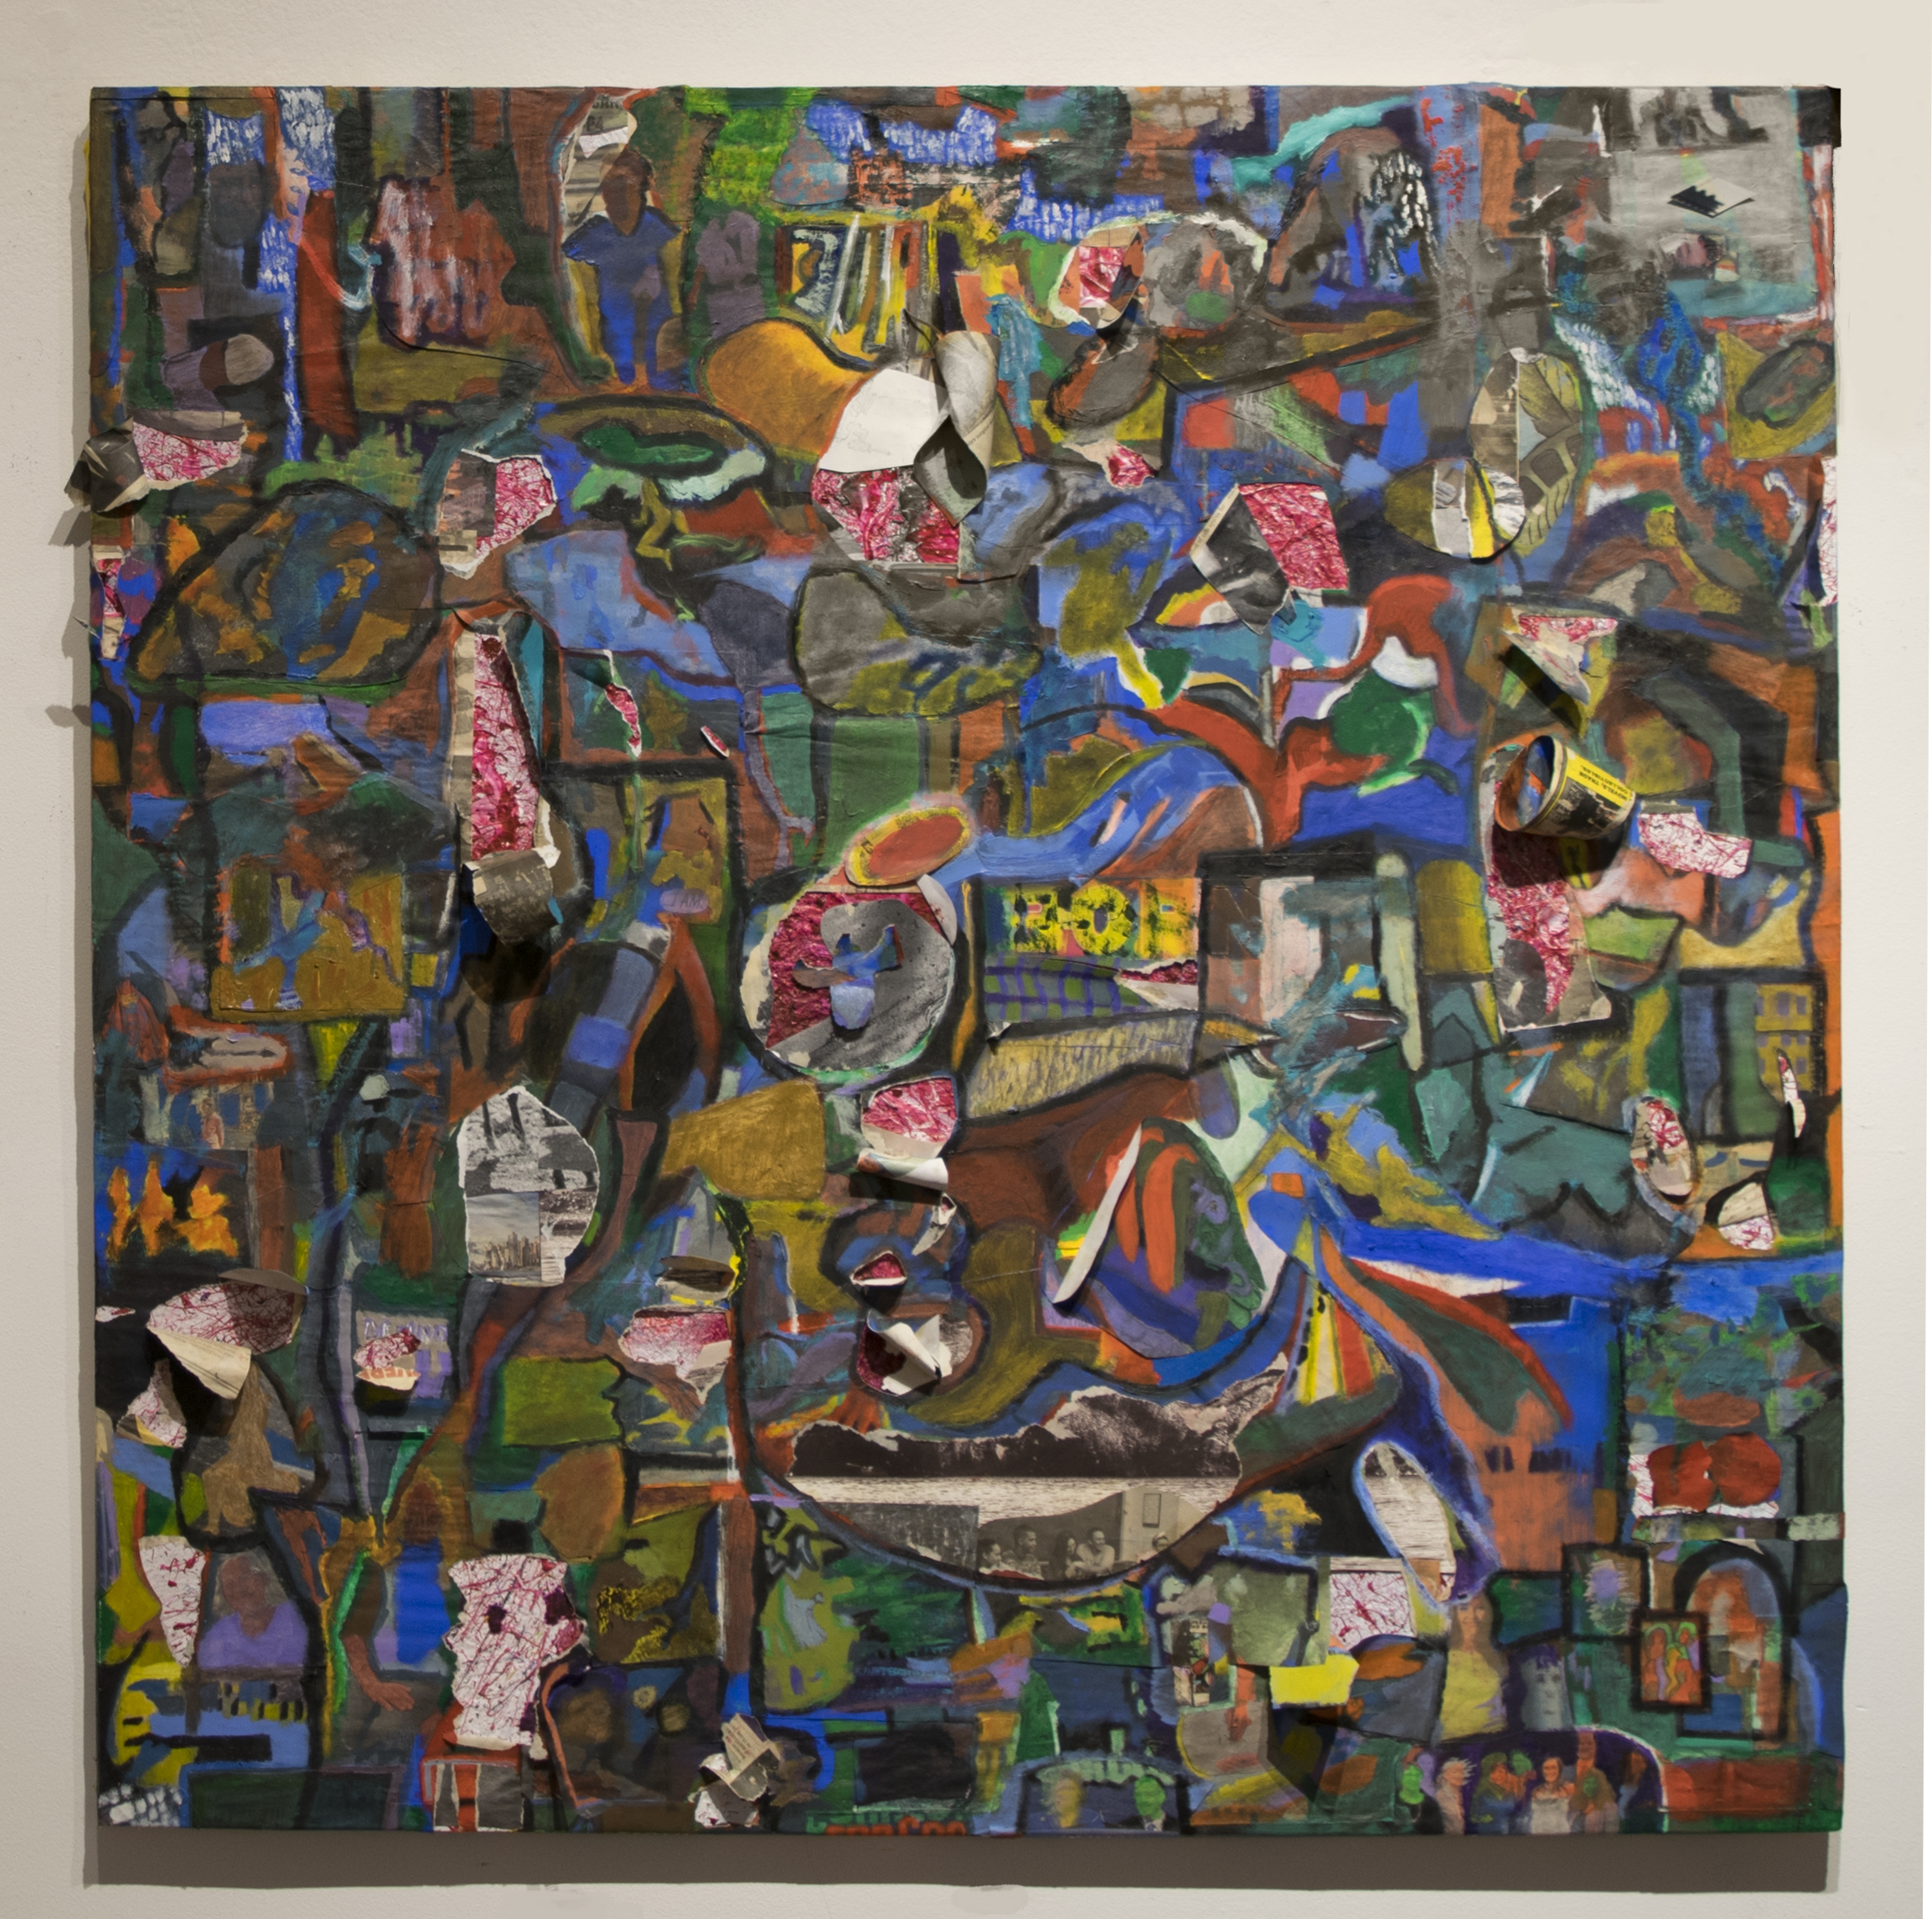 Forty, 31.5 x 31.5 inches, Oil and Collage on Canvas, 2023